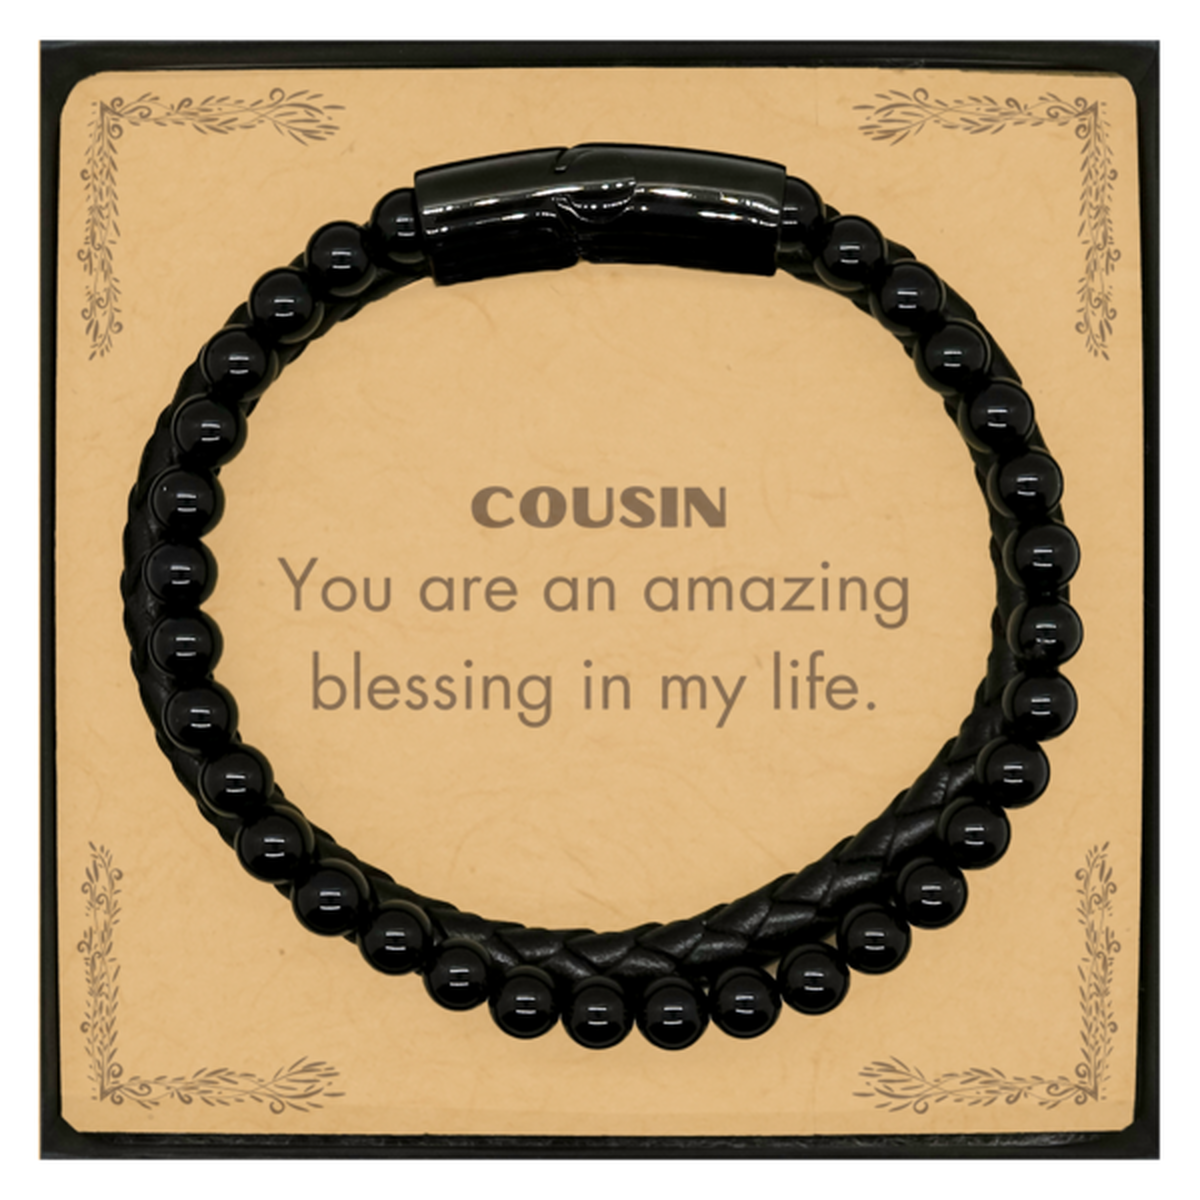 Cousin Stone Leather Bracelets, You are an amazing blessing in my life, Thank You Gifts For Cousin, Inspirational Birthday Christmas Unique Gifts For Cousin